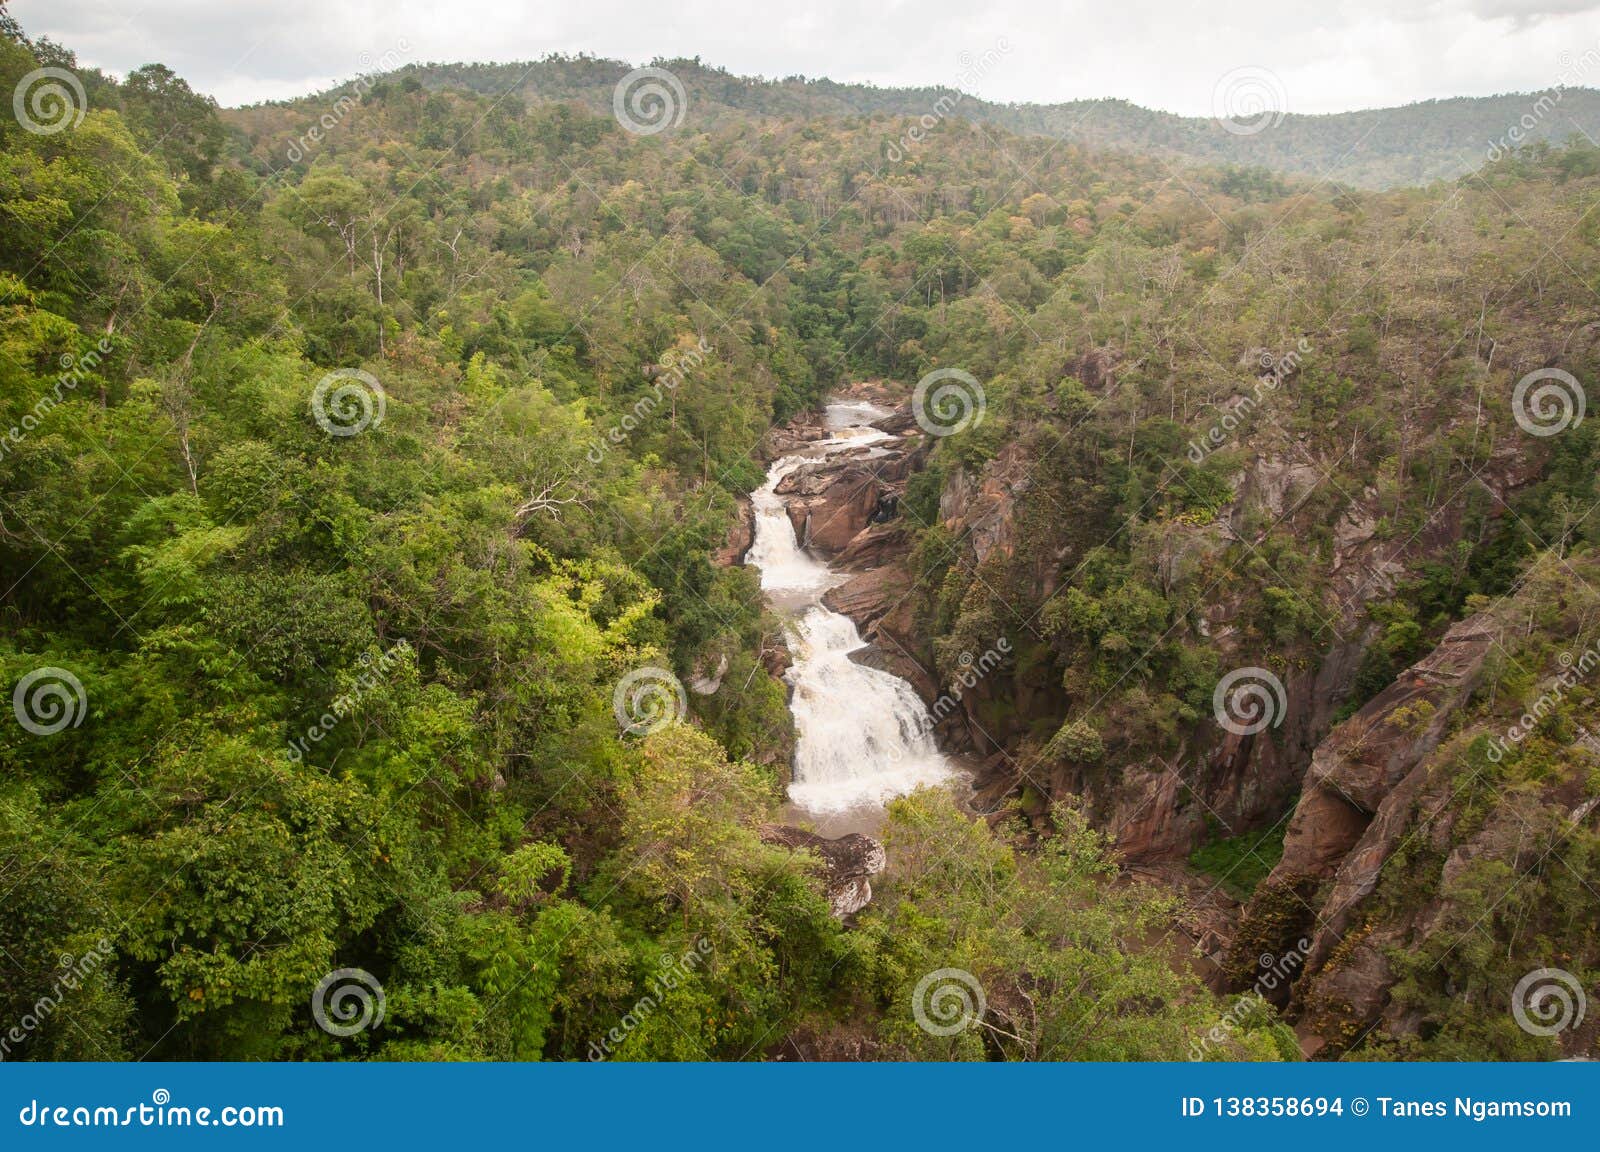 top view, the defile of tad huang waterfall river viewed. scenery tropical forest landscape. the properties of the two countries.